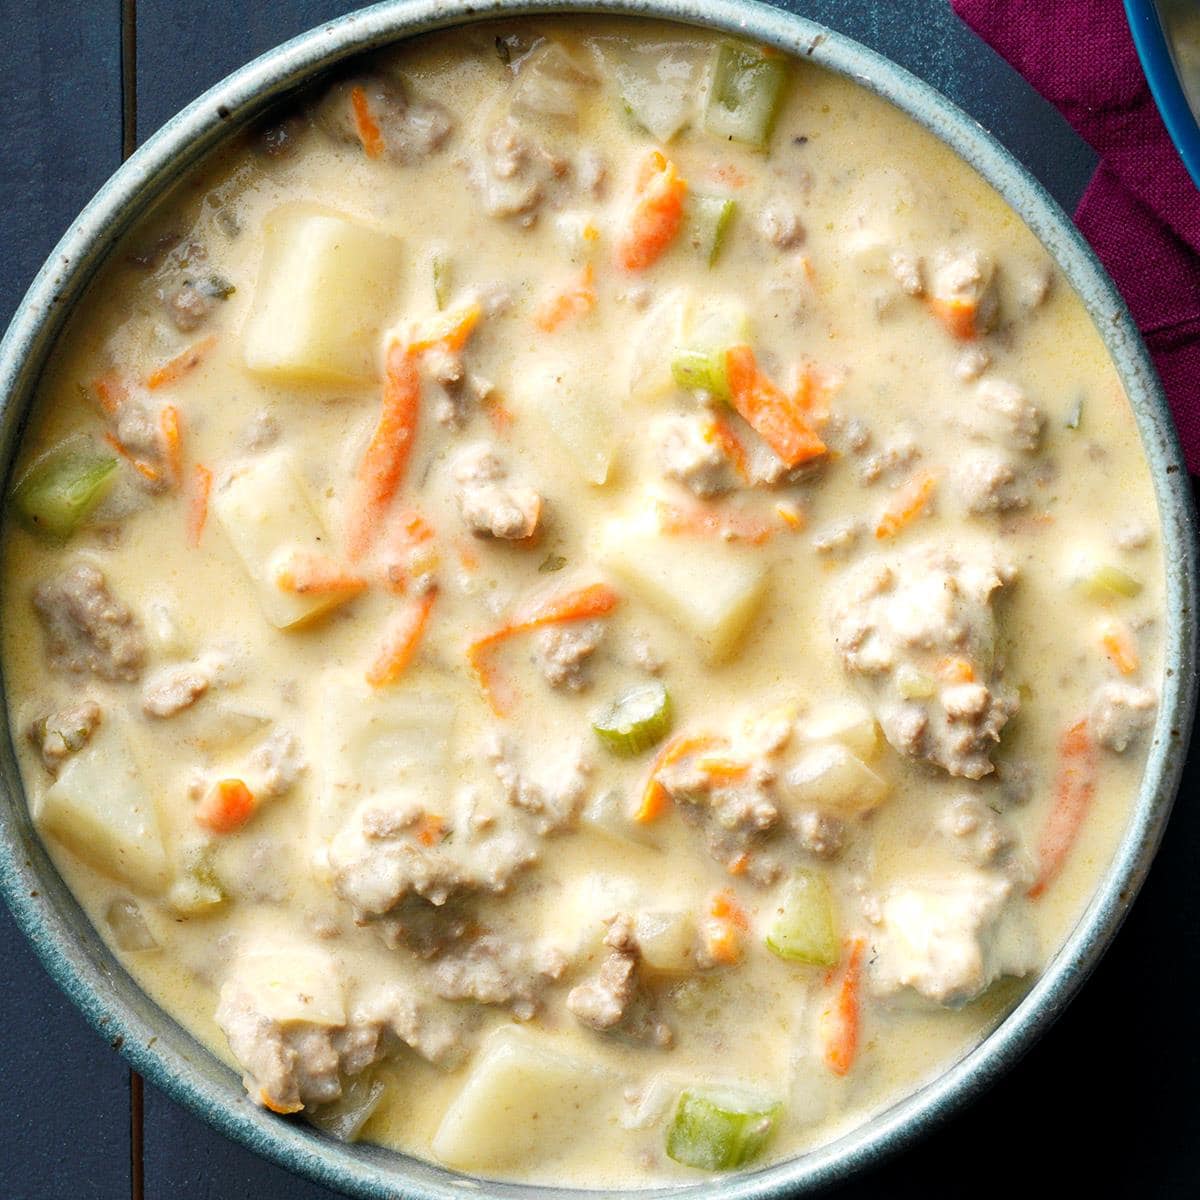 Creamy Cheeseburger Soup with Ground Beef, Carrots and Potatoes